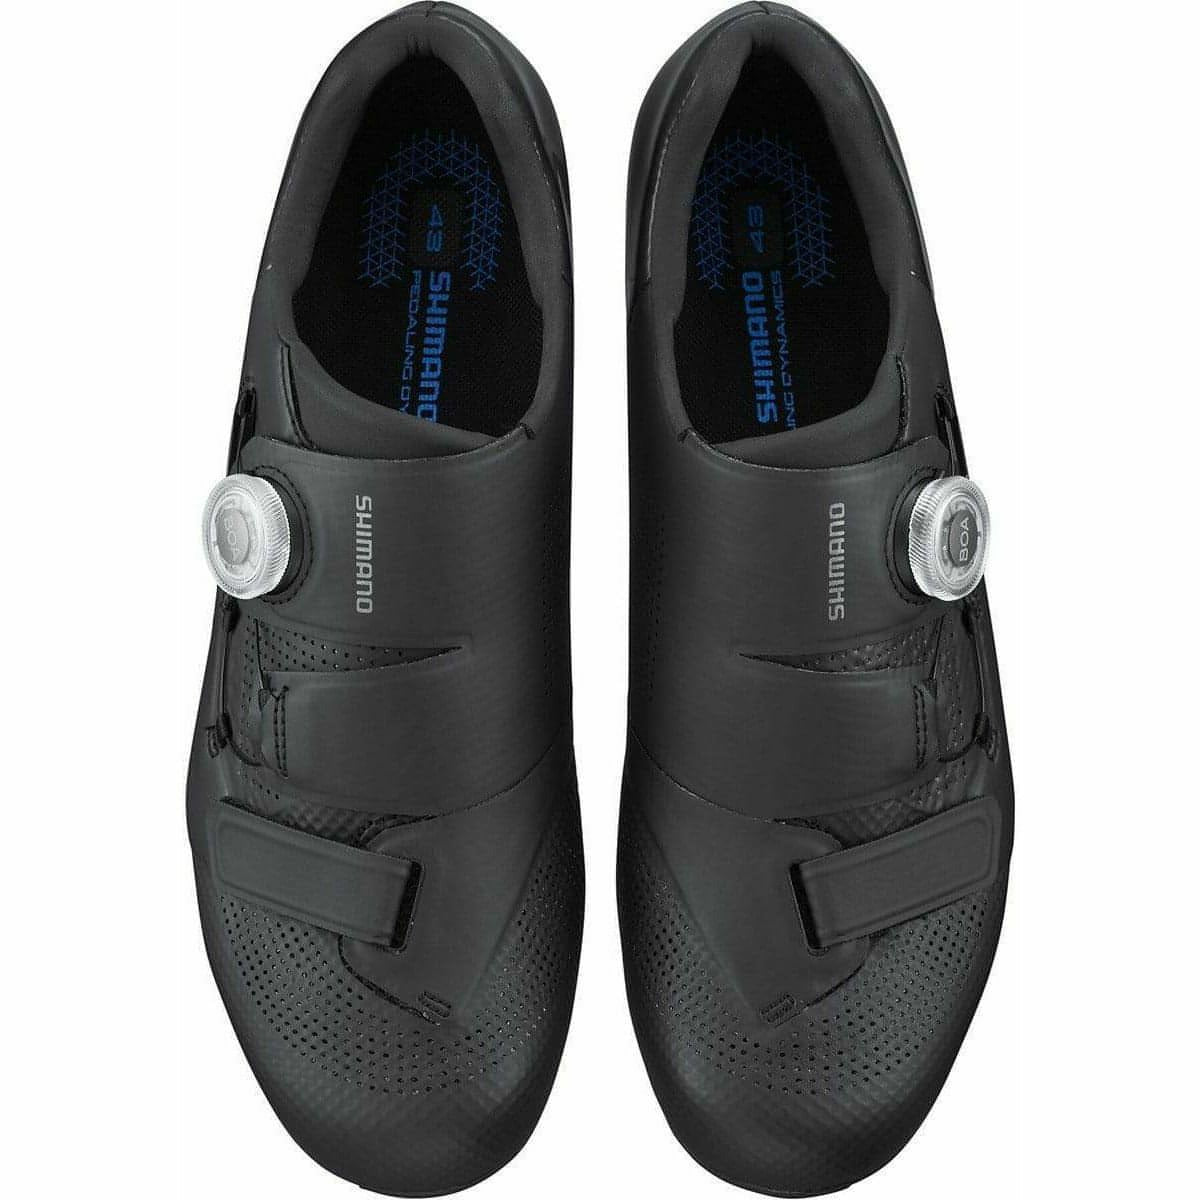 Shimano RC502 Road Cycling Shoes - Black - Start Fitness